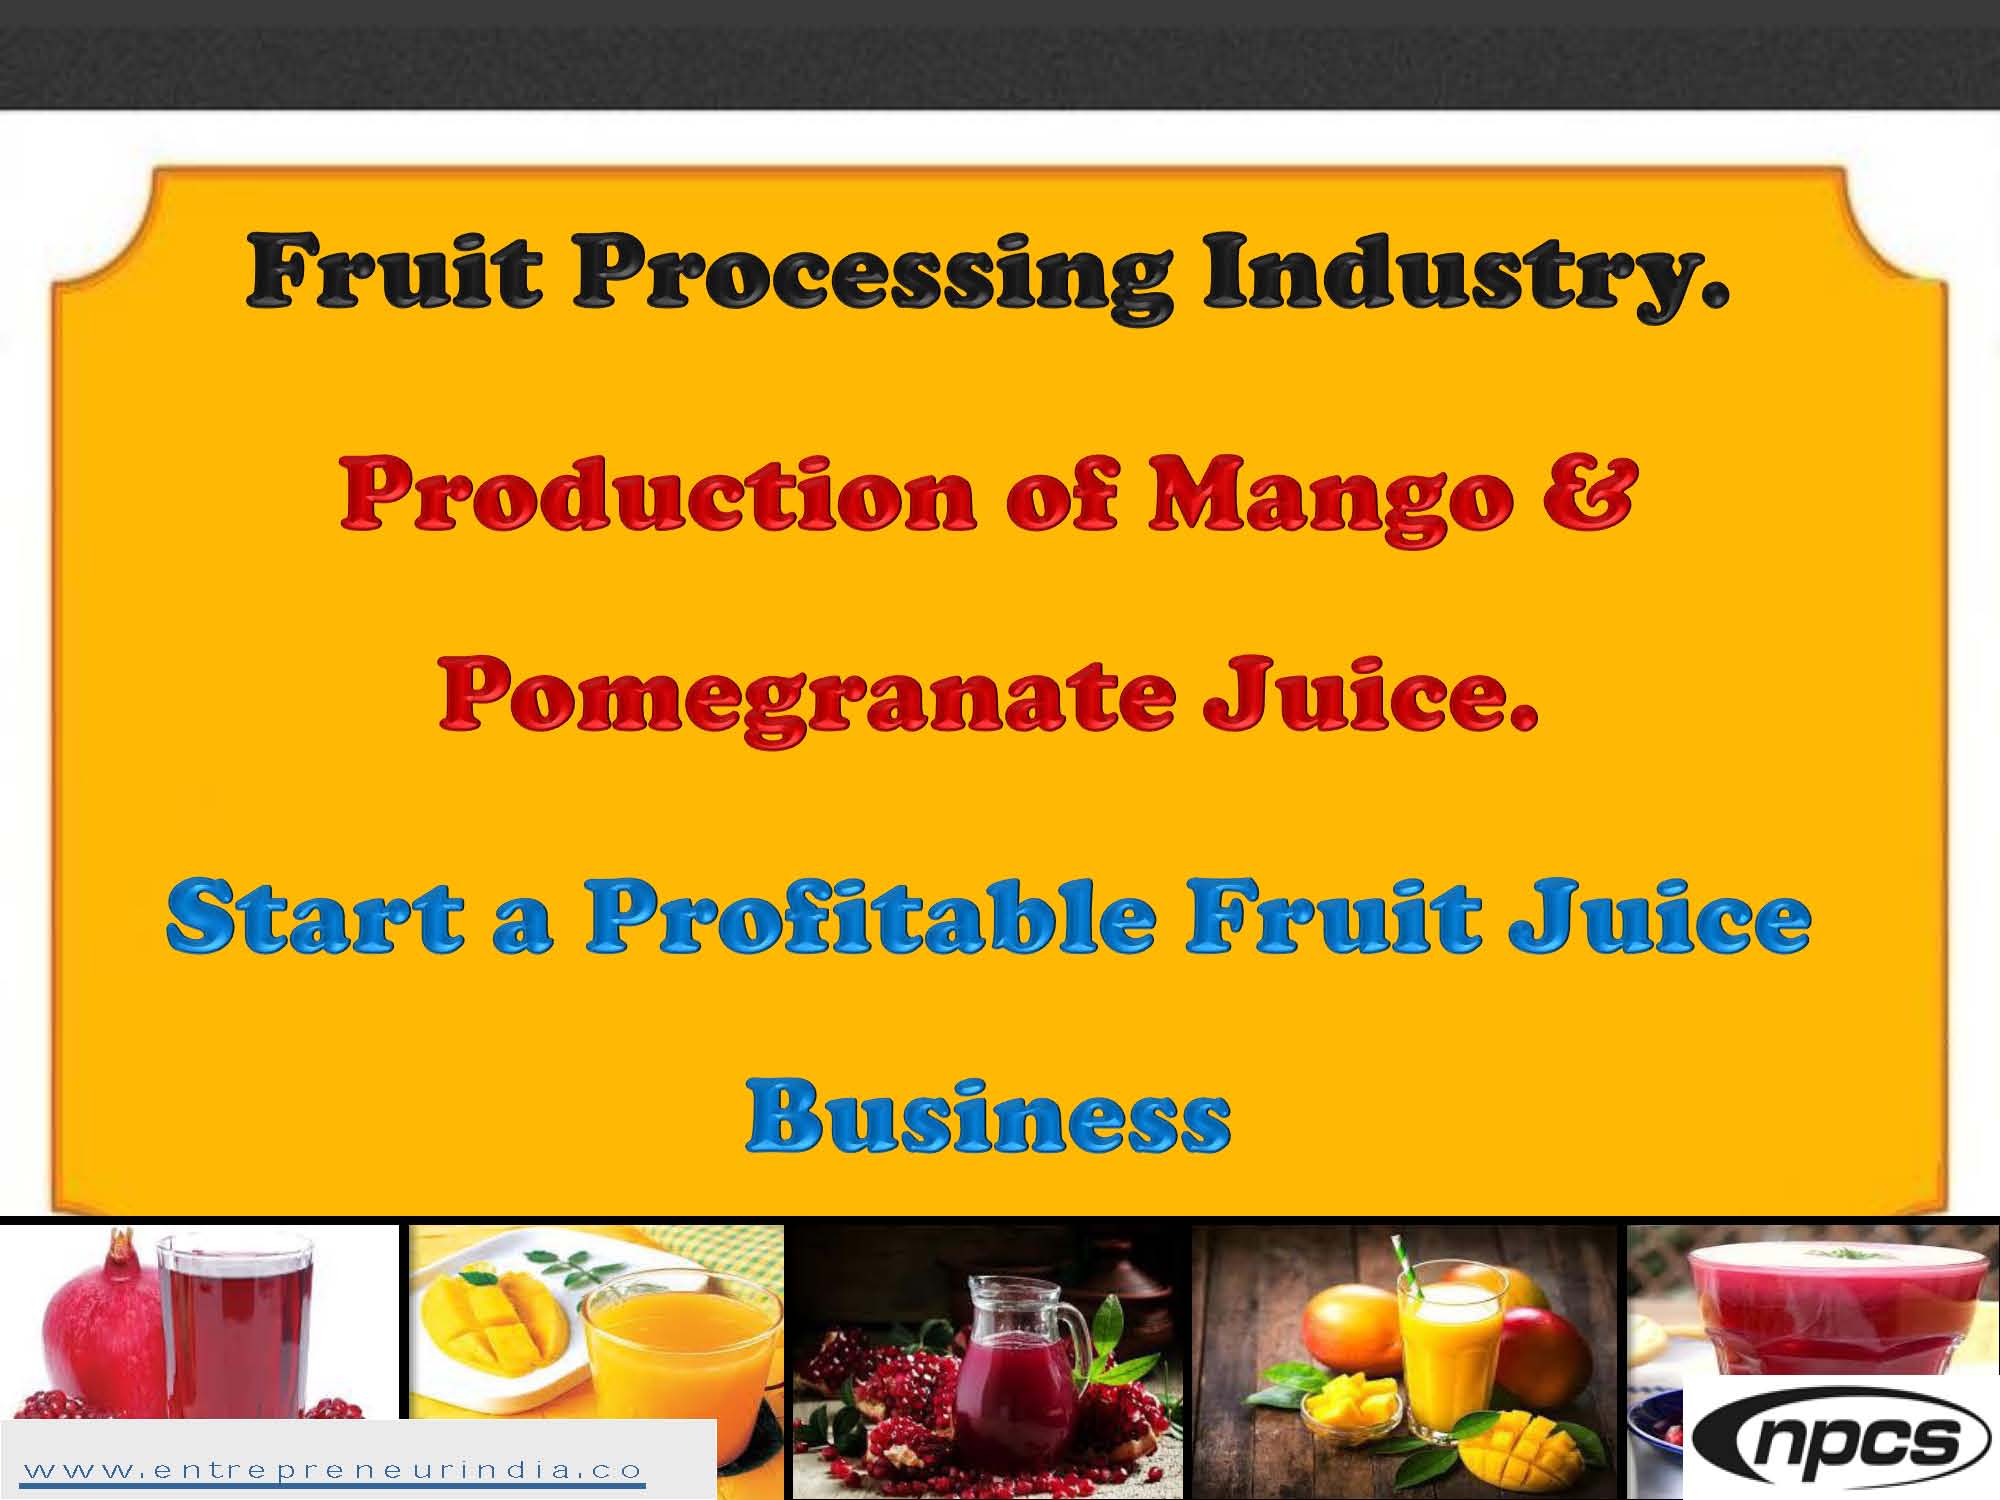 Fruit Processing Industry Production of Mango and Pomegranate Juice